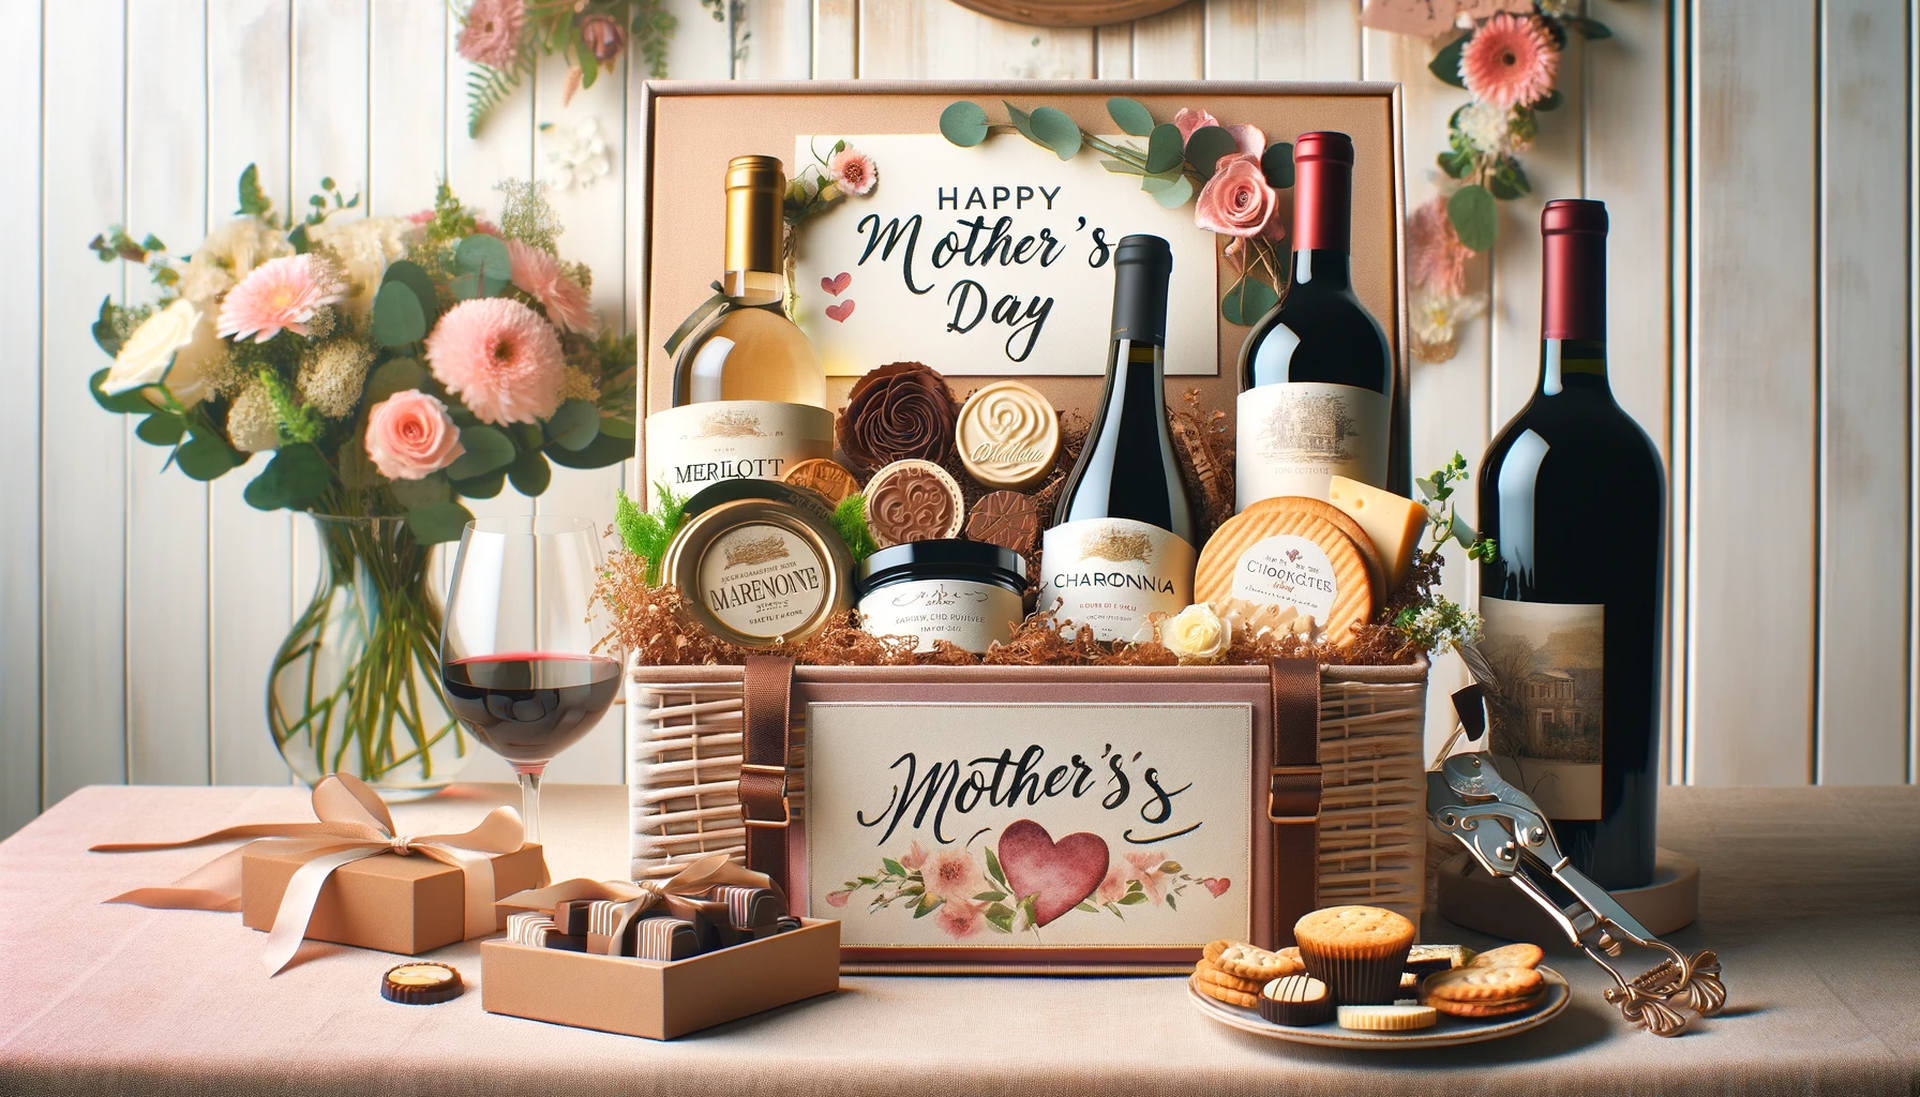 wine gift basket - DALL·E 2023-12-13 16.17.01 - A heartwarming Mothers Day scene showcasing a beautifully curated wine gift basket. The basket includes a selection of favorite wines like Merlot and